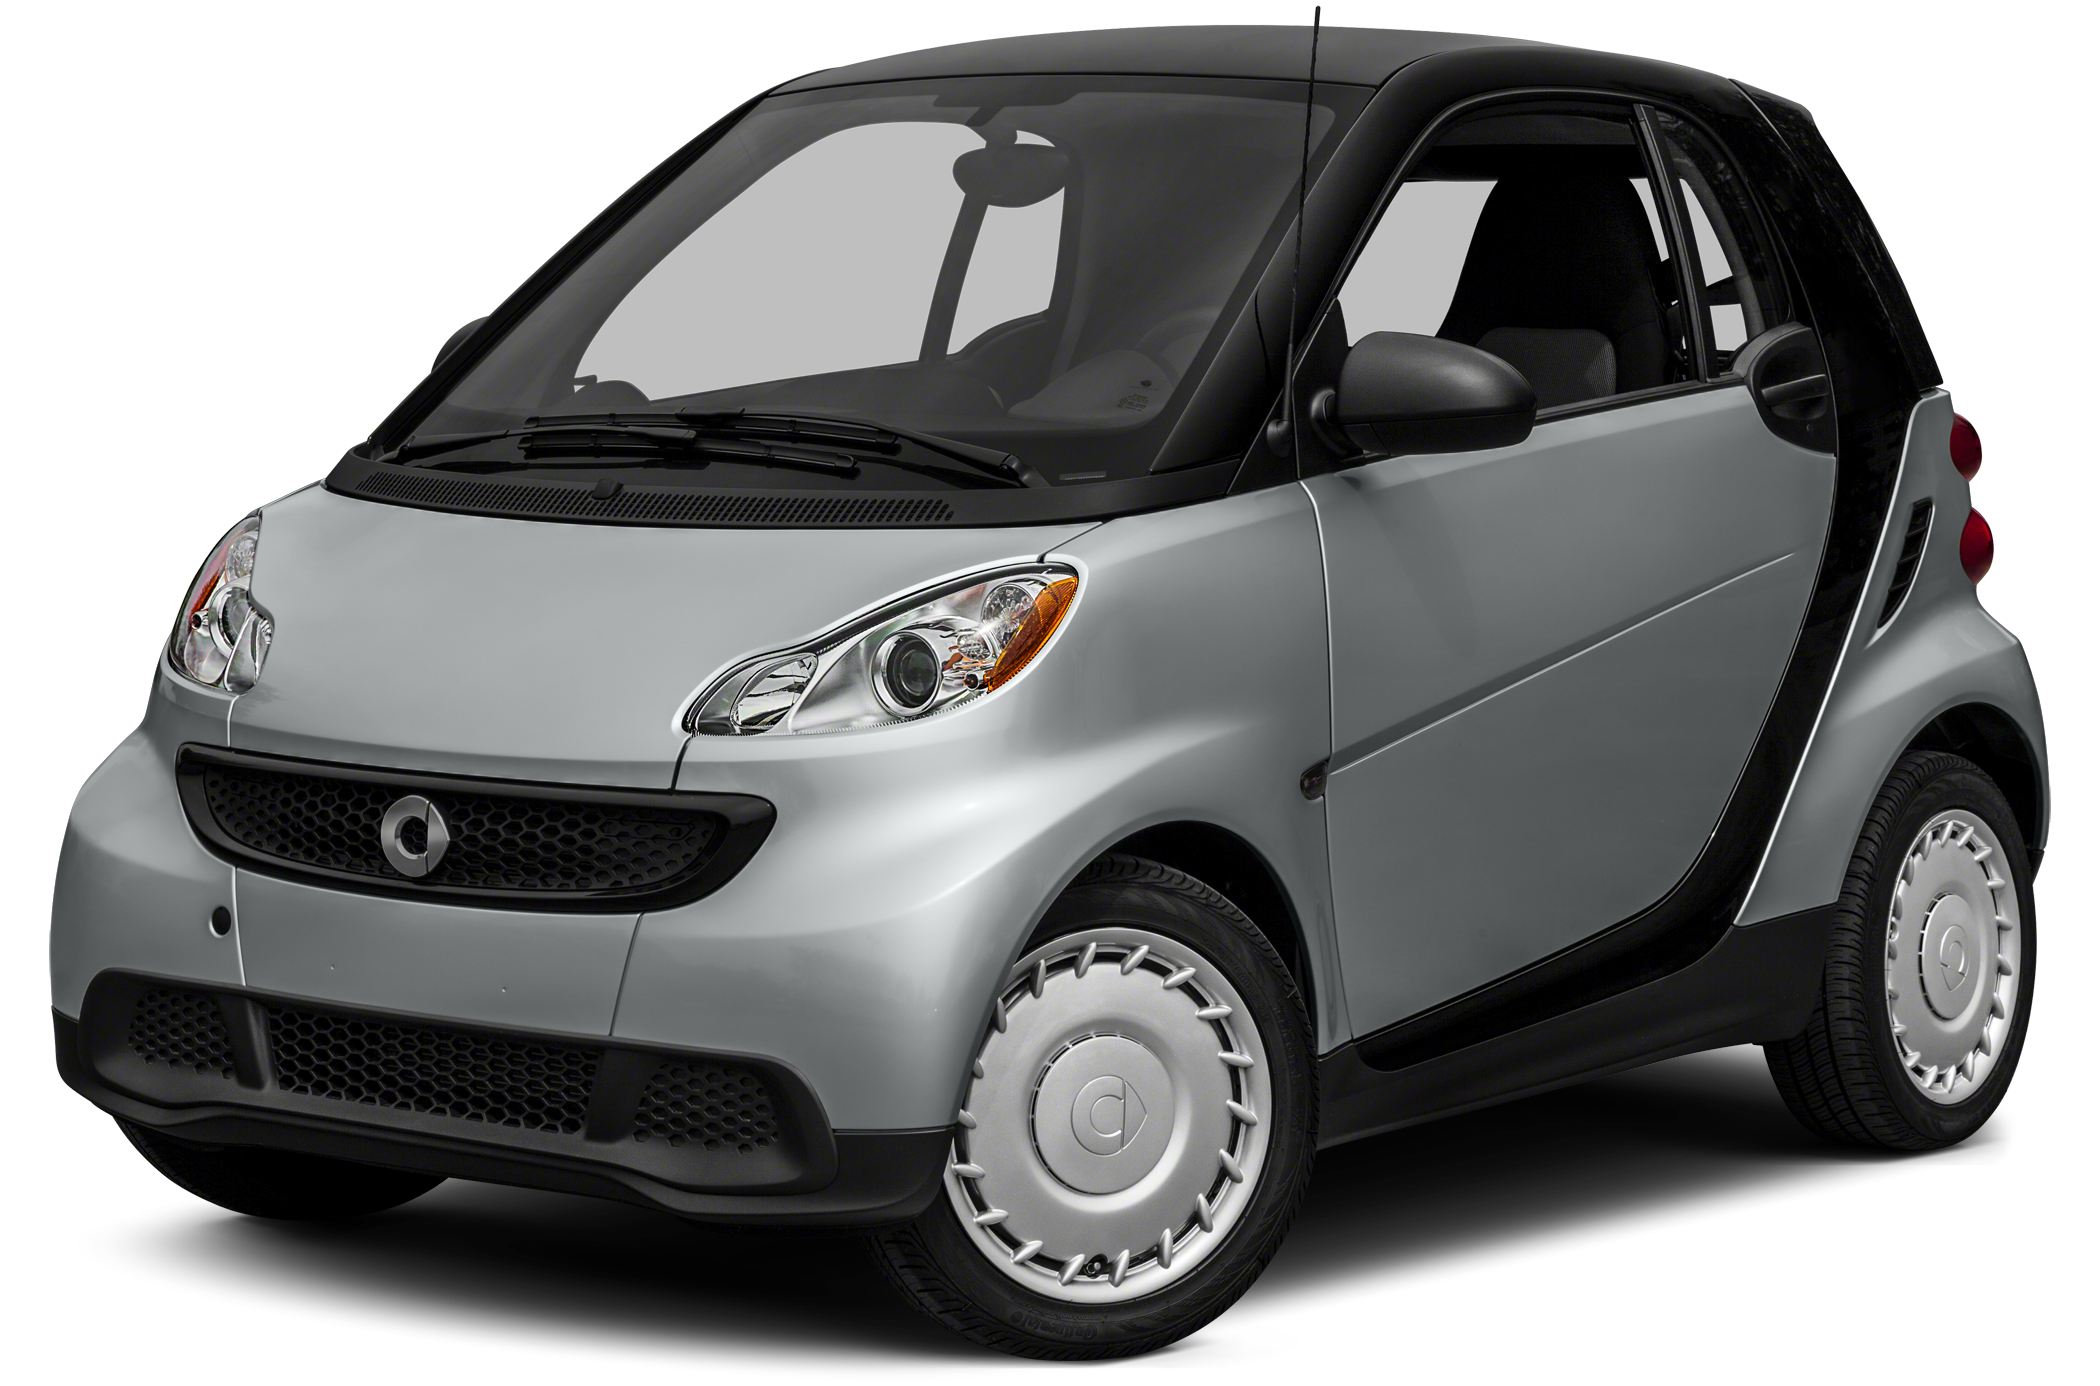 2014 smart ForTwo